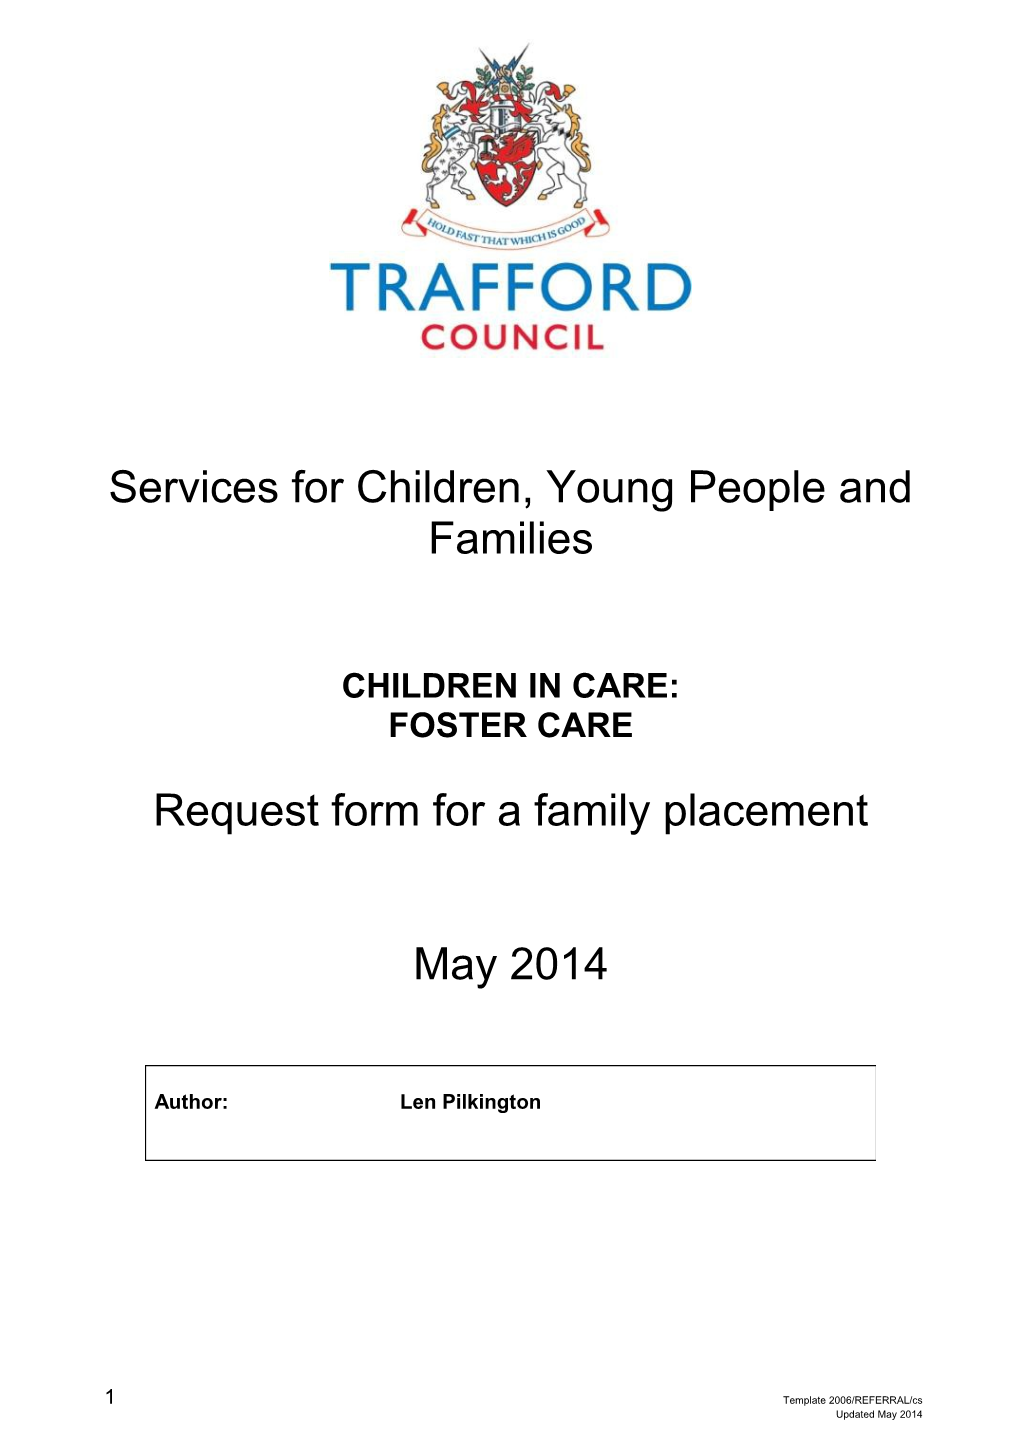 Request Form for Family Placement